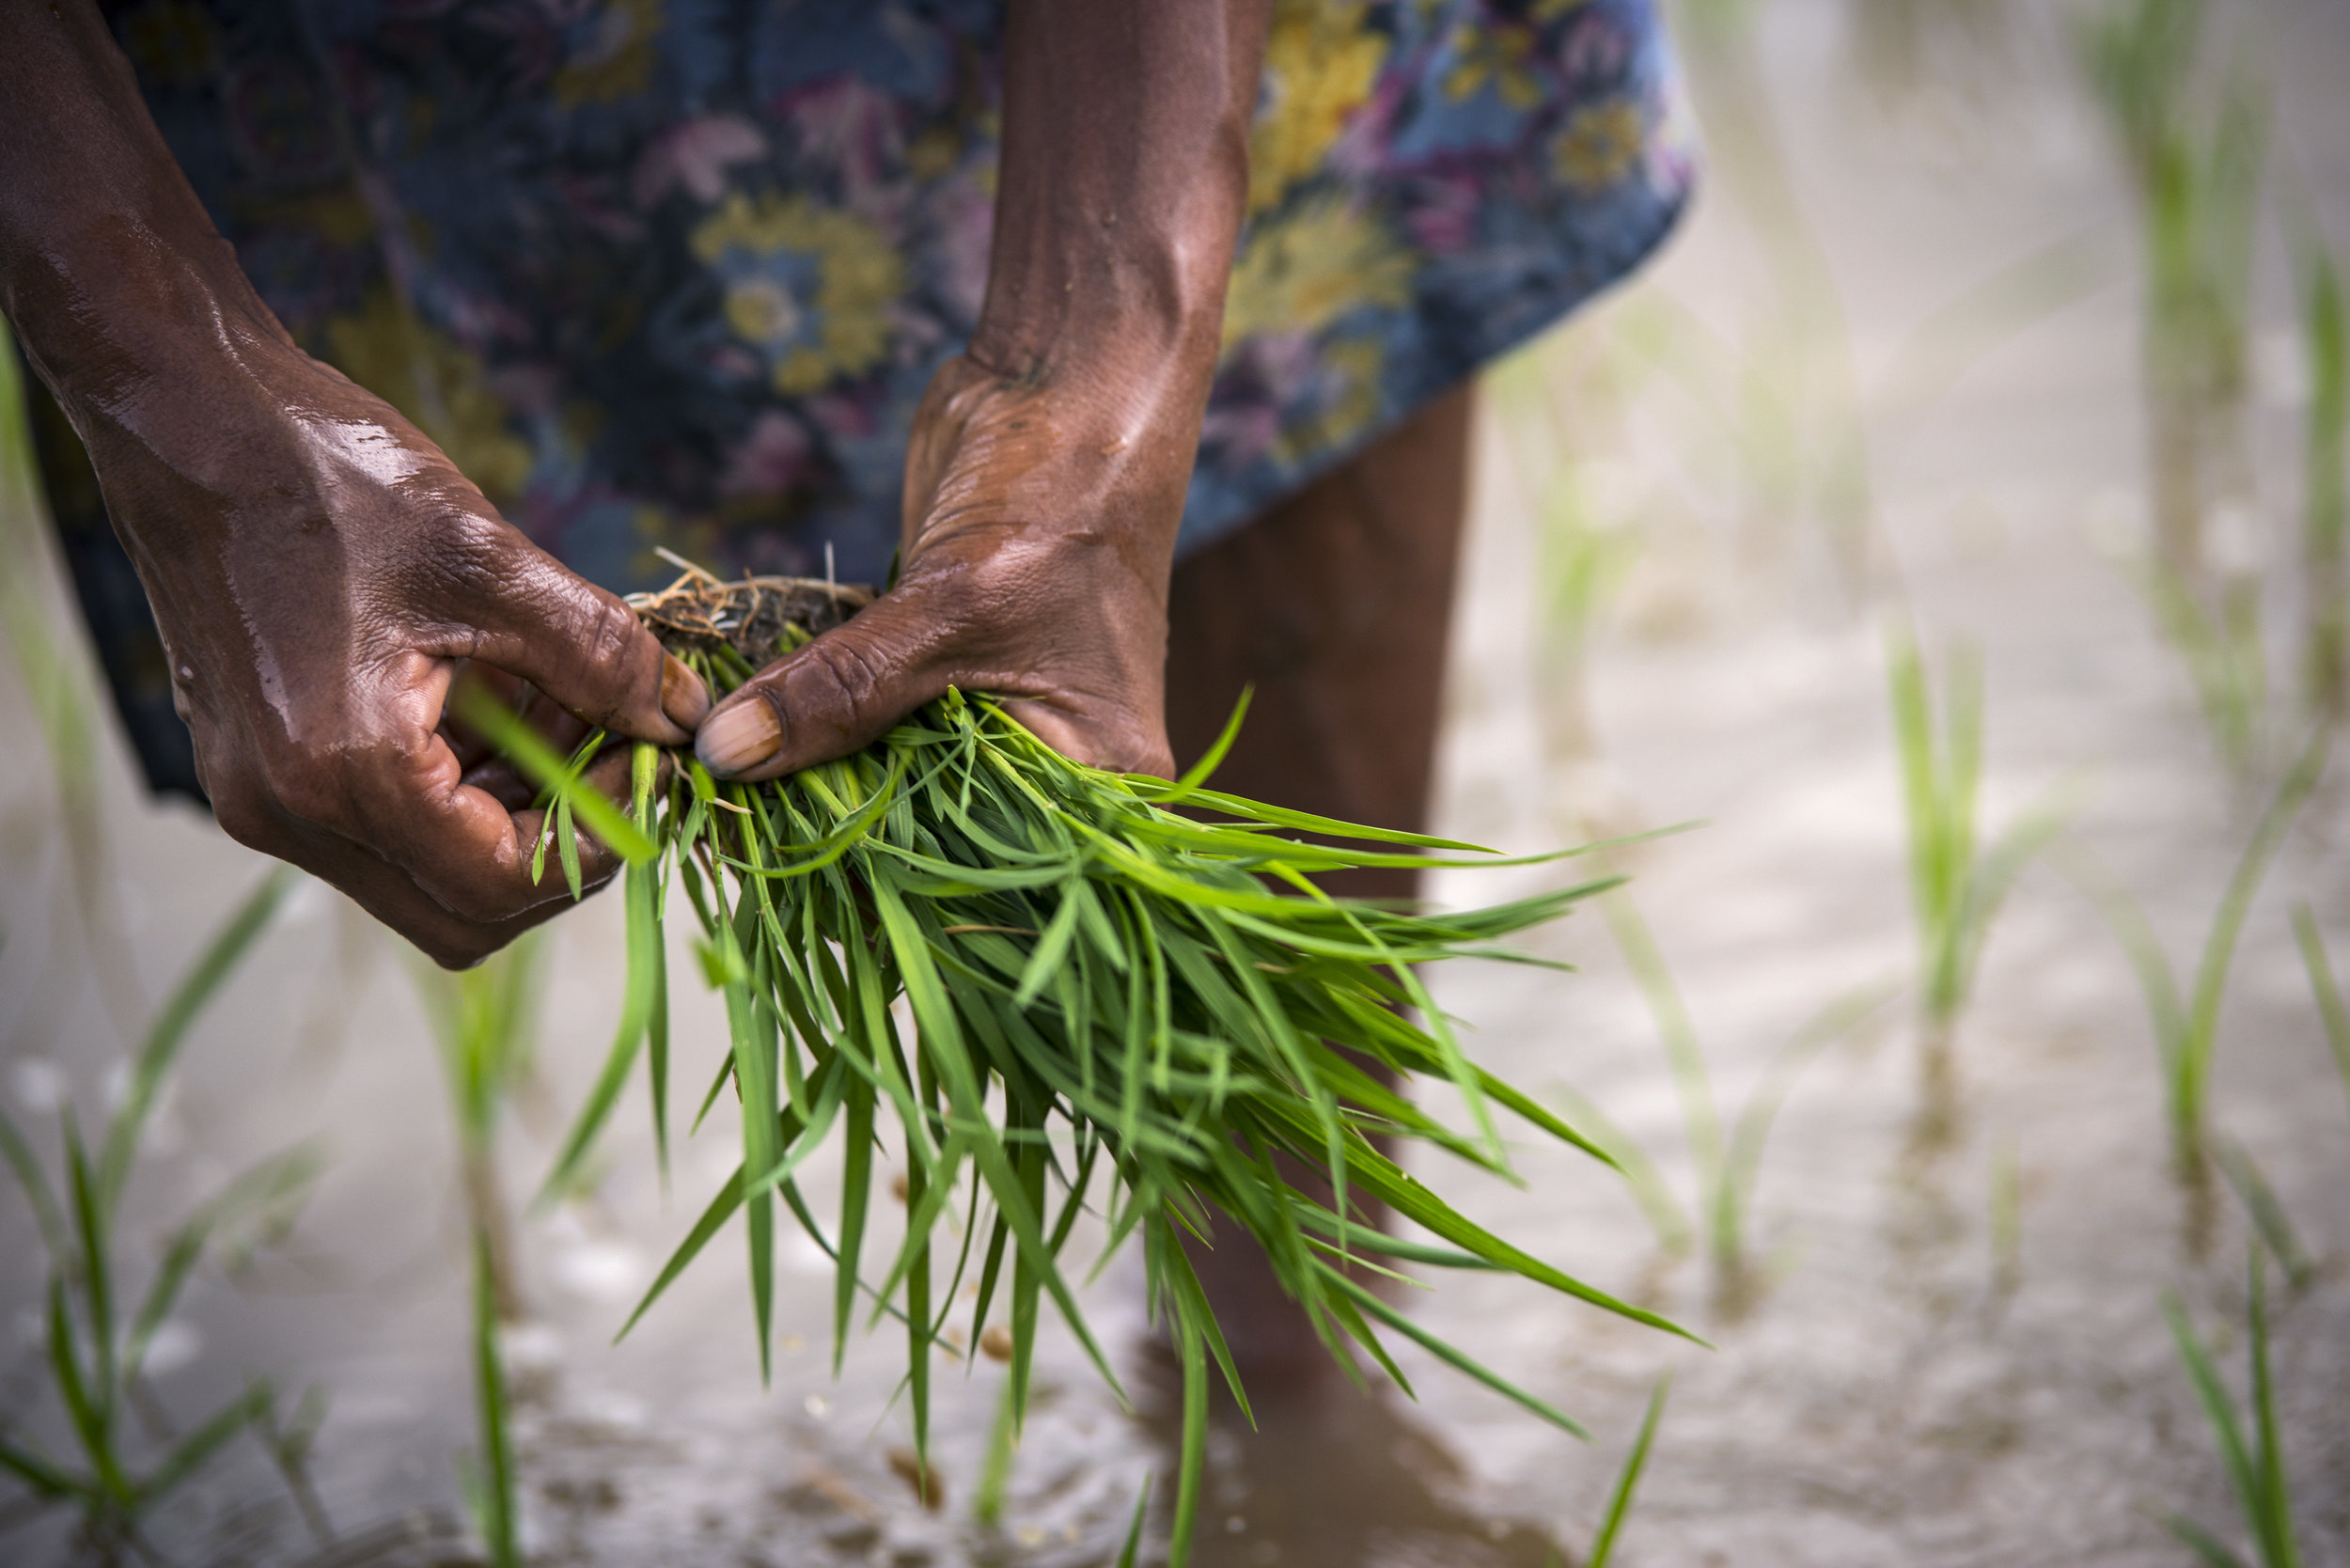  Each rice seedling is planted a few centimeters deep in nutrient rich clay, kept flooded throughout the season through terrace structure and irrigation systems. 